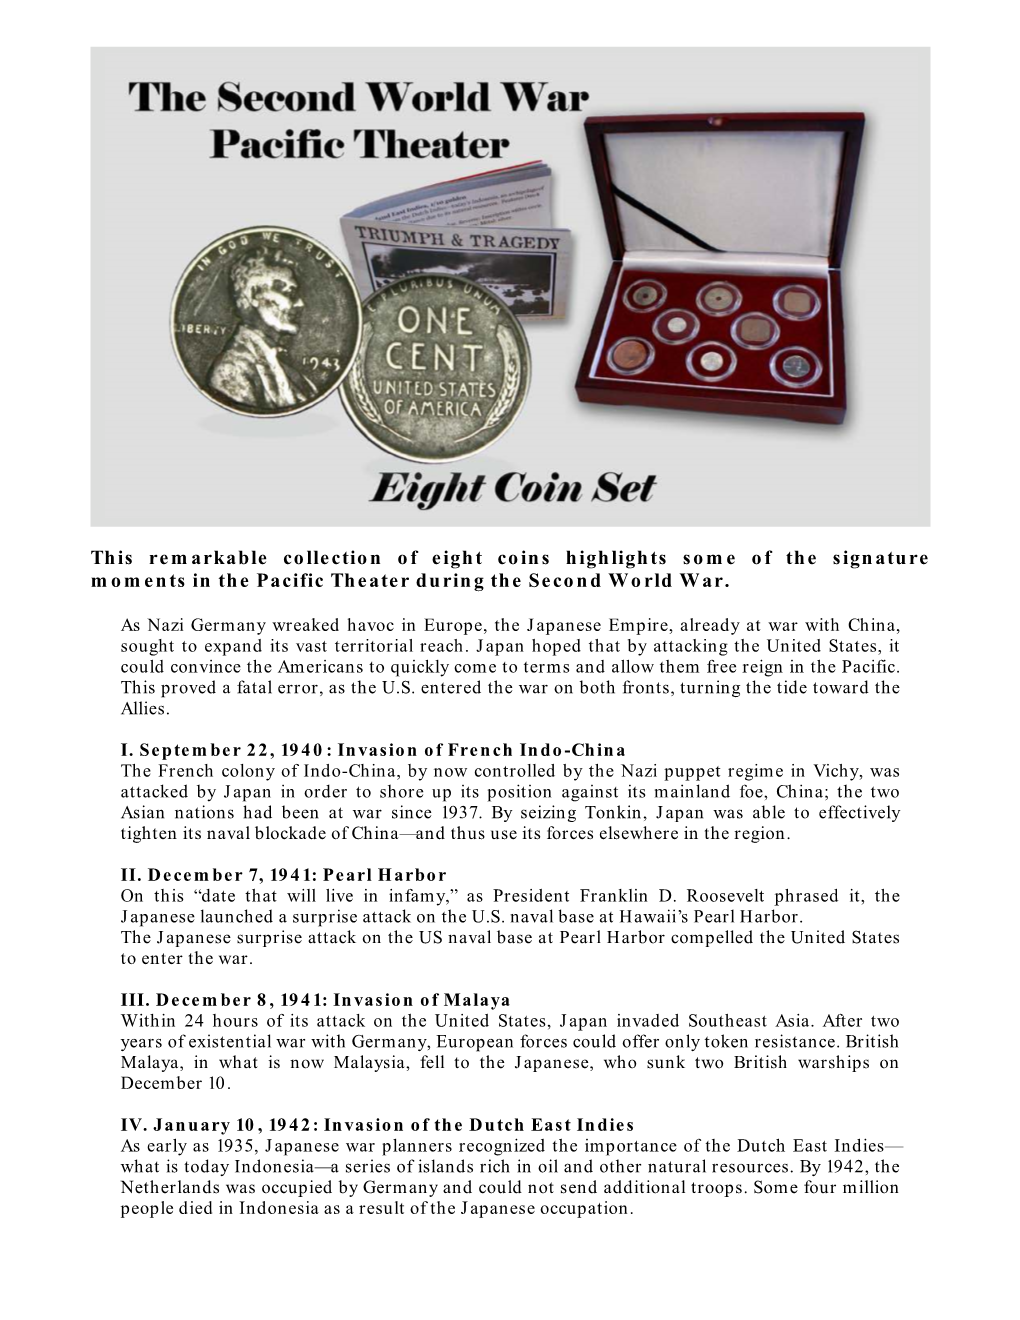 This Remarkable Collection of Eight Coins Highlights Some of the Signature Moments in the Pacific Theater During the Second Wo Rld War